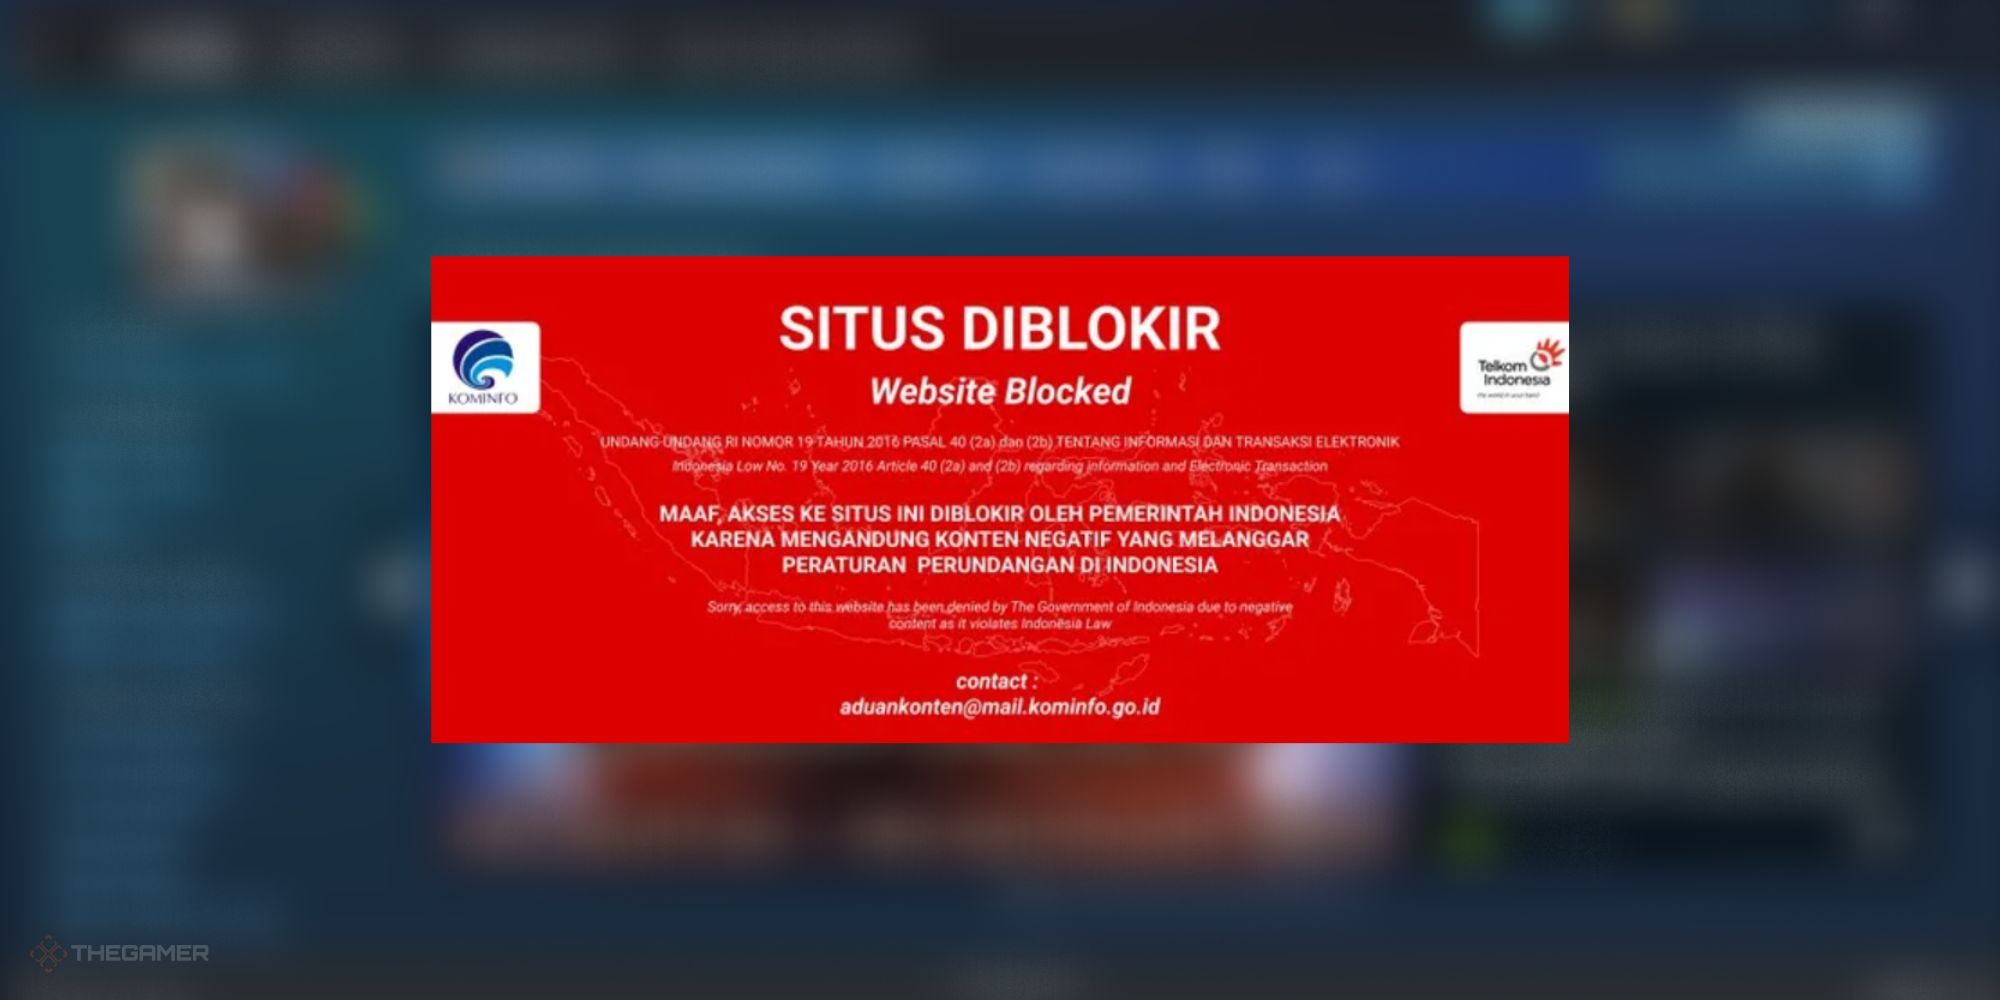 Steam Epic Games Battlenet Banned In Indonesia